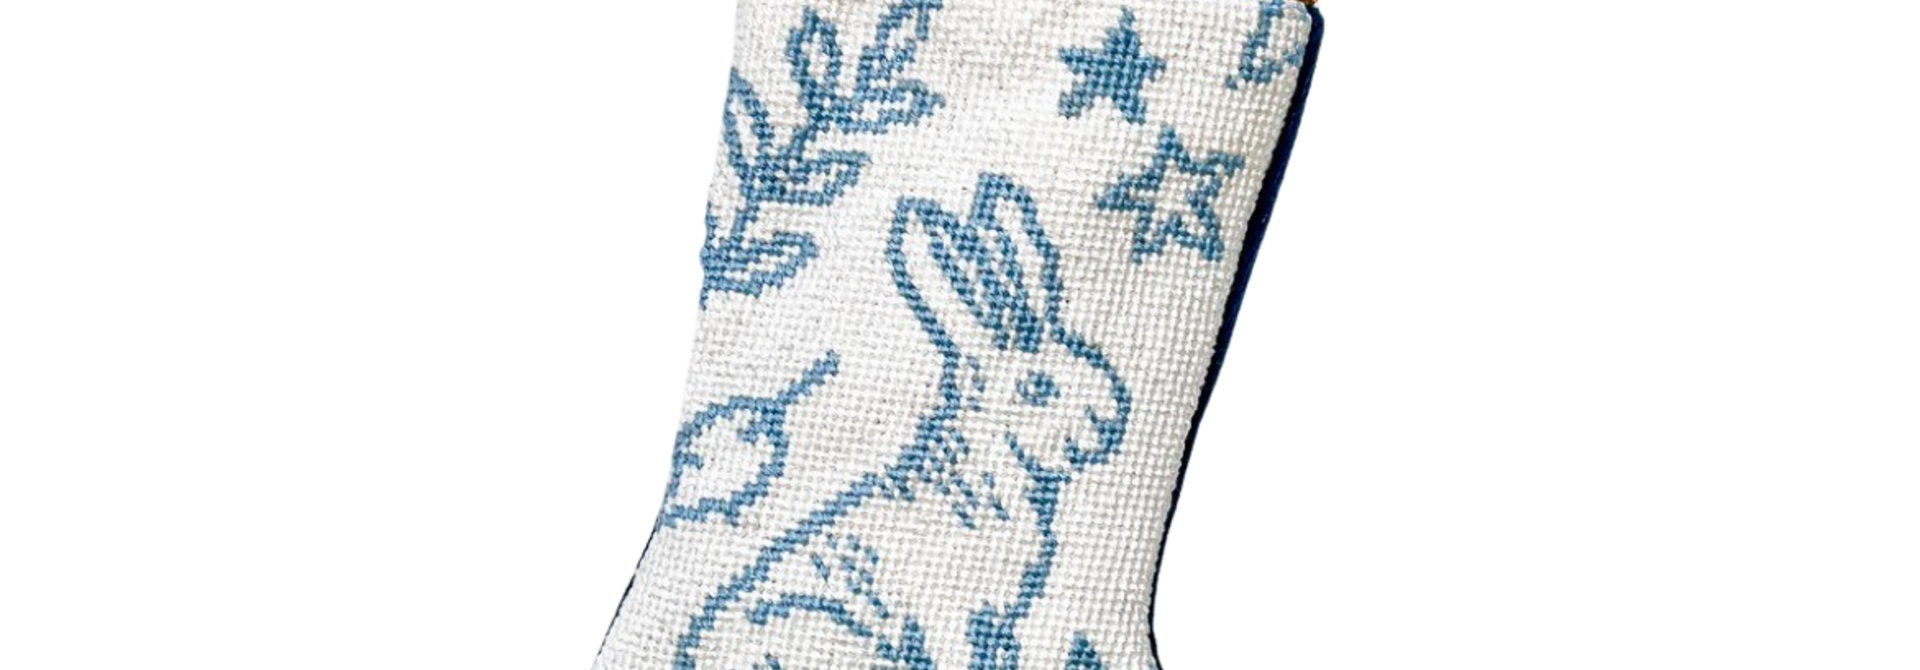 Cottontail Bunny in Blue | The Bauble Stocking Collection - 4.25 Inch x 6 Inch